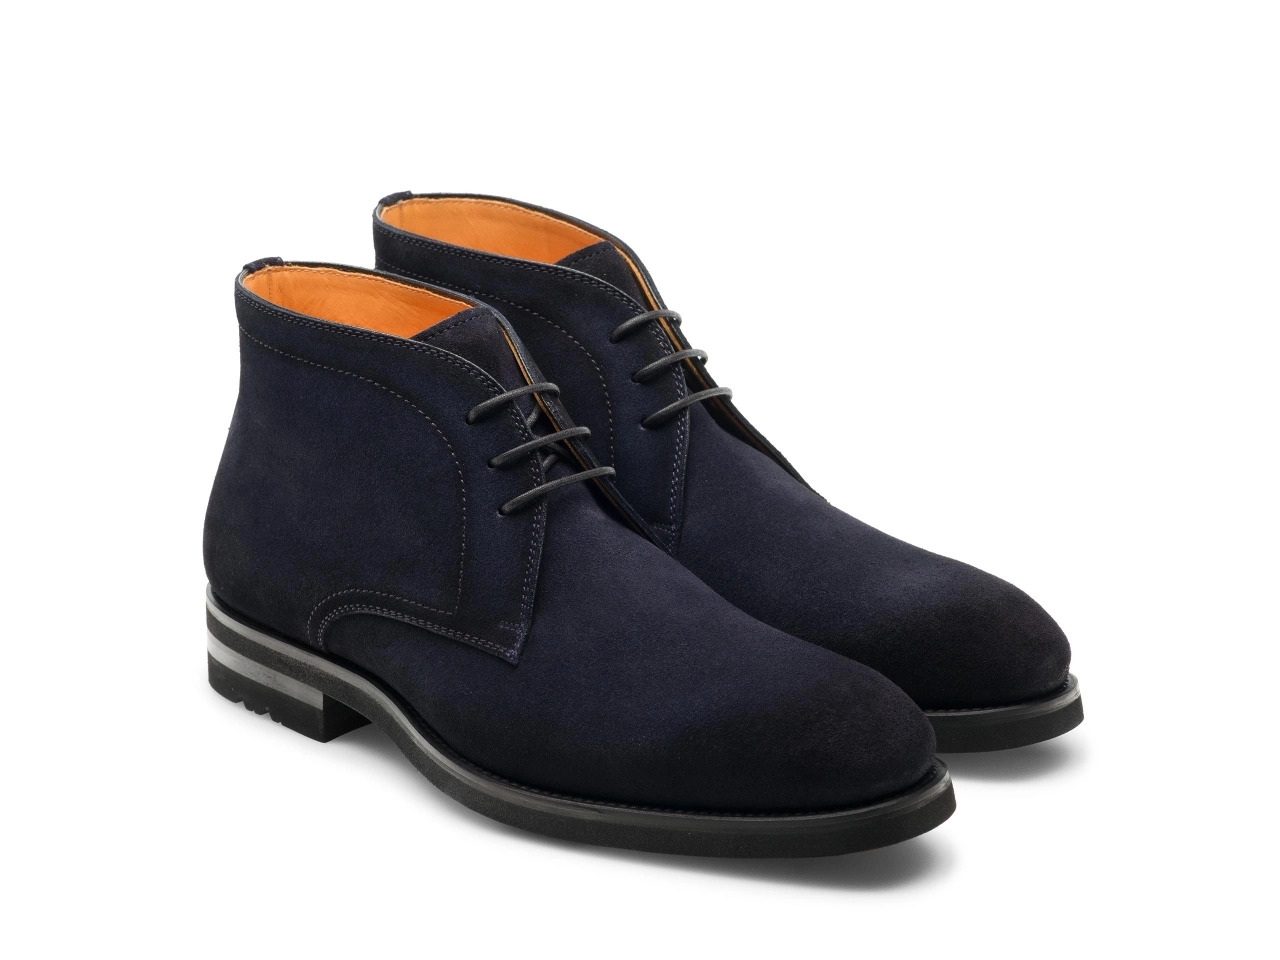 Magnanni suede boots